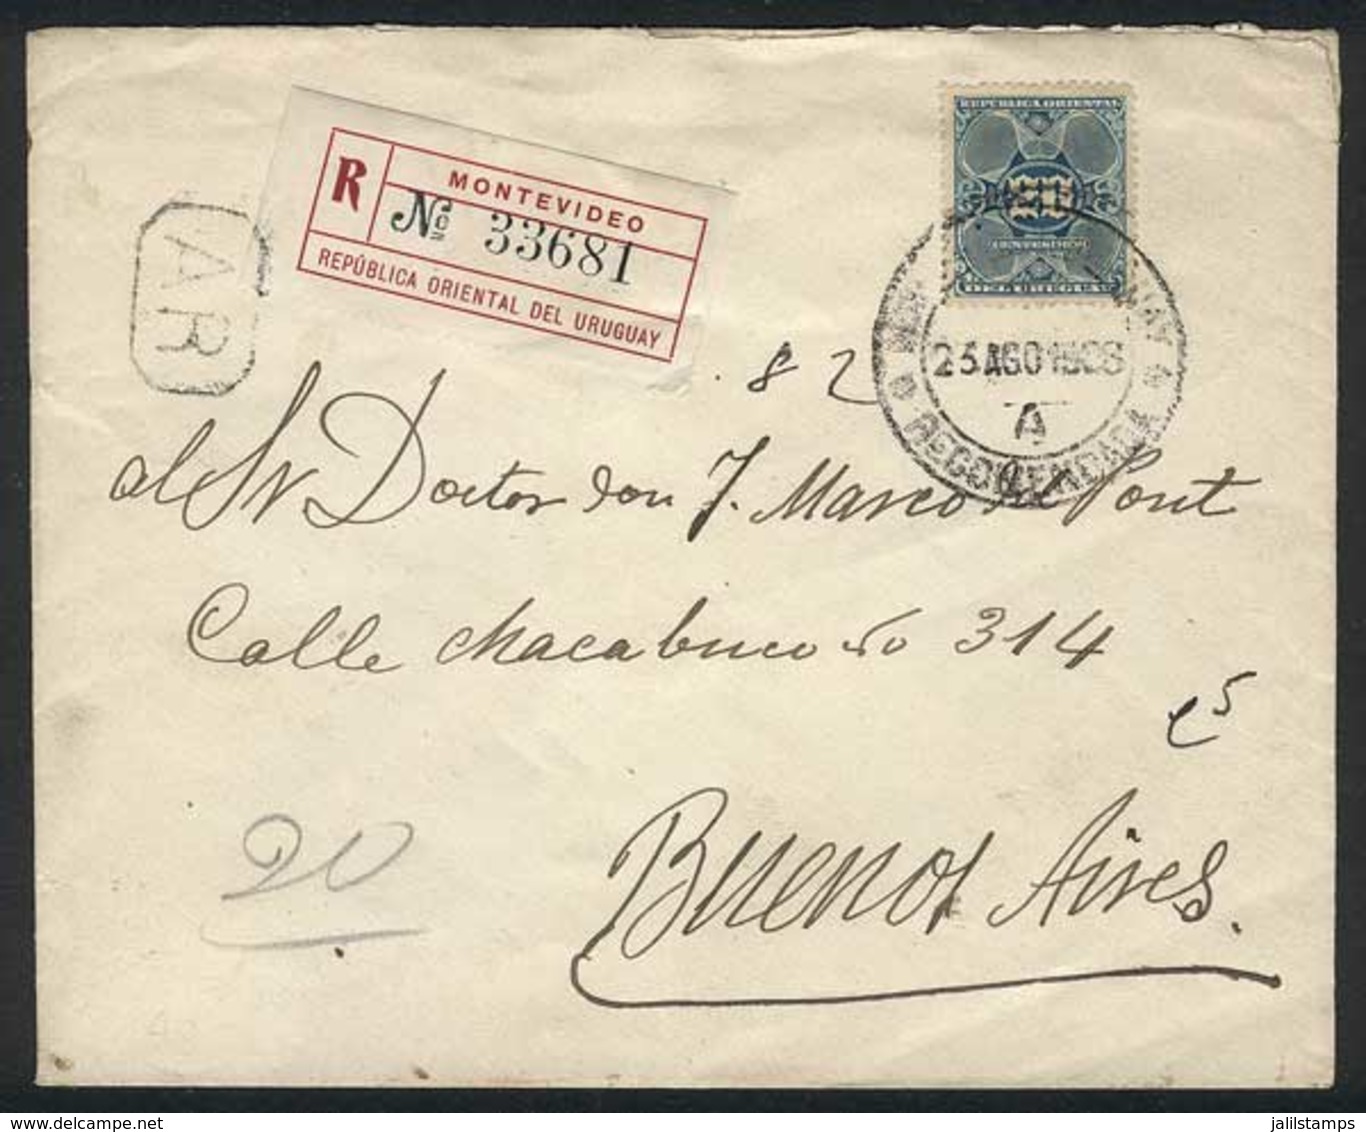 URUGUAY: Cover Franked By Sc.165, Sent From Montevideo To Buenos Aires On 23/AU/1908 By Registered Mail, VF Quality! - Uruguay